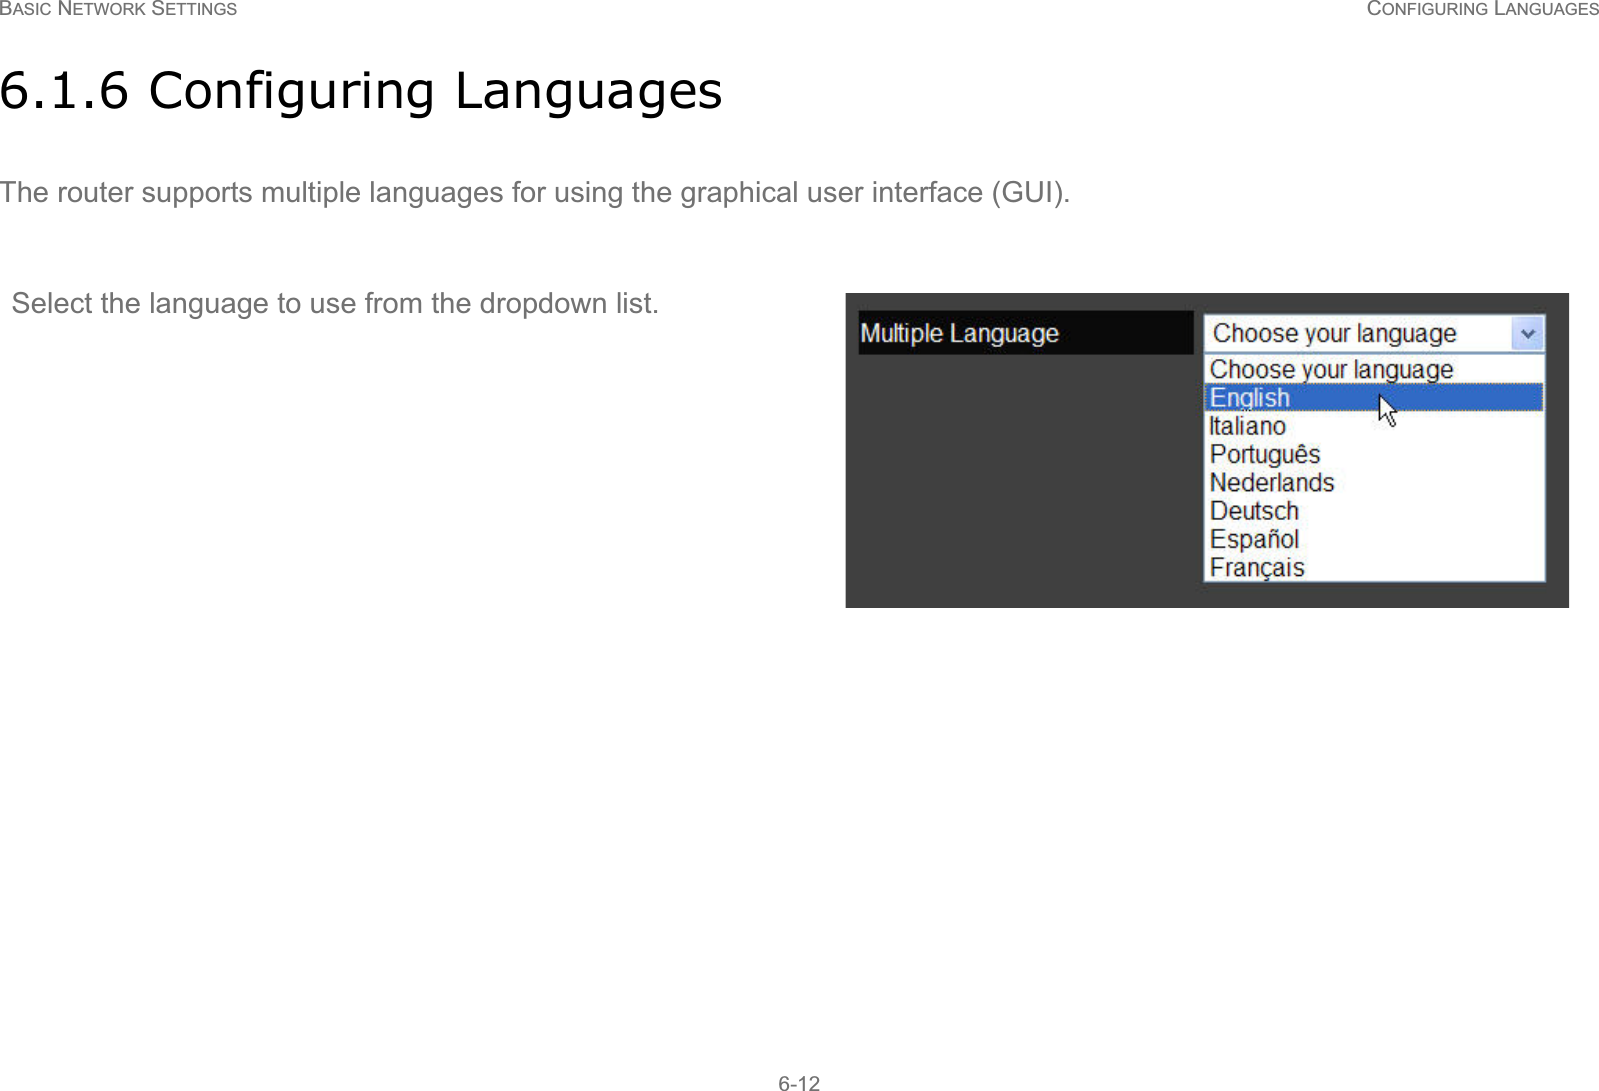 BASIC NETWORK SETTINGS CONFIGURING LANGUAGES6-126.1.6 Configuring LanguagesThe router supports multiple languages for using the graphical user interface (GUI).Select the language to use from the dropdown list.